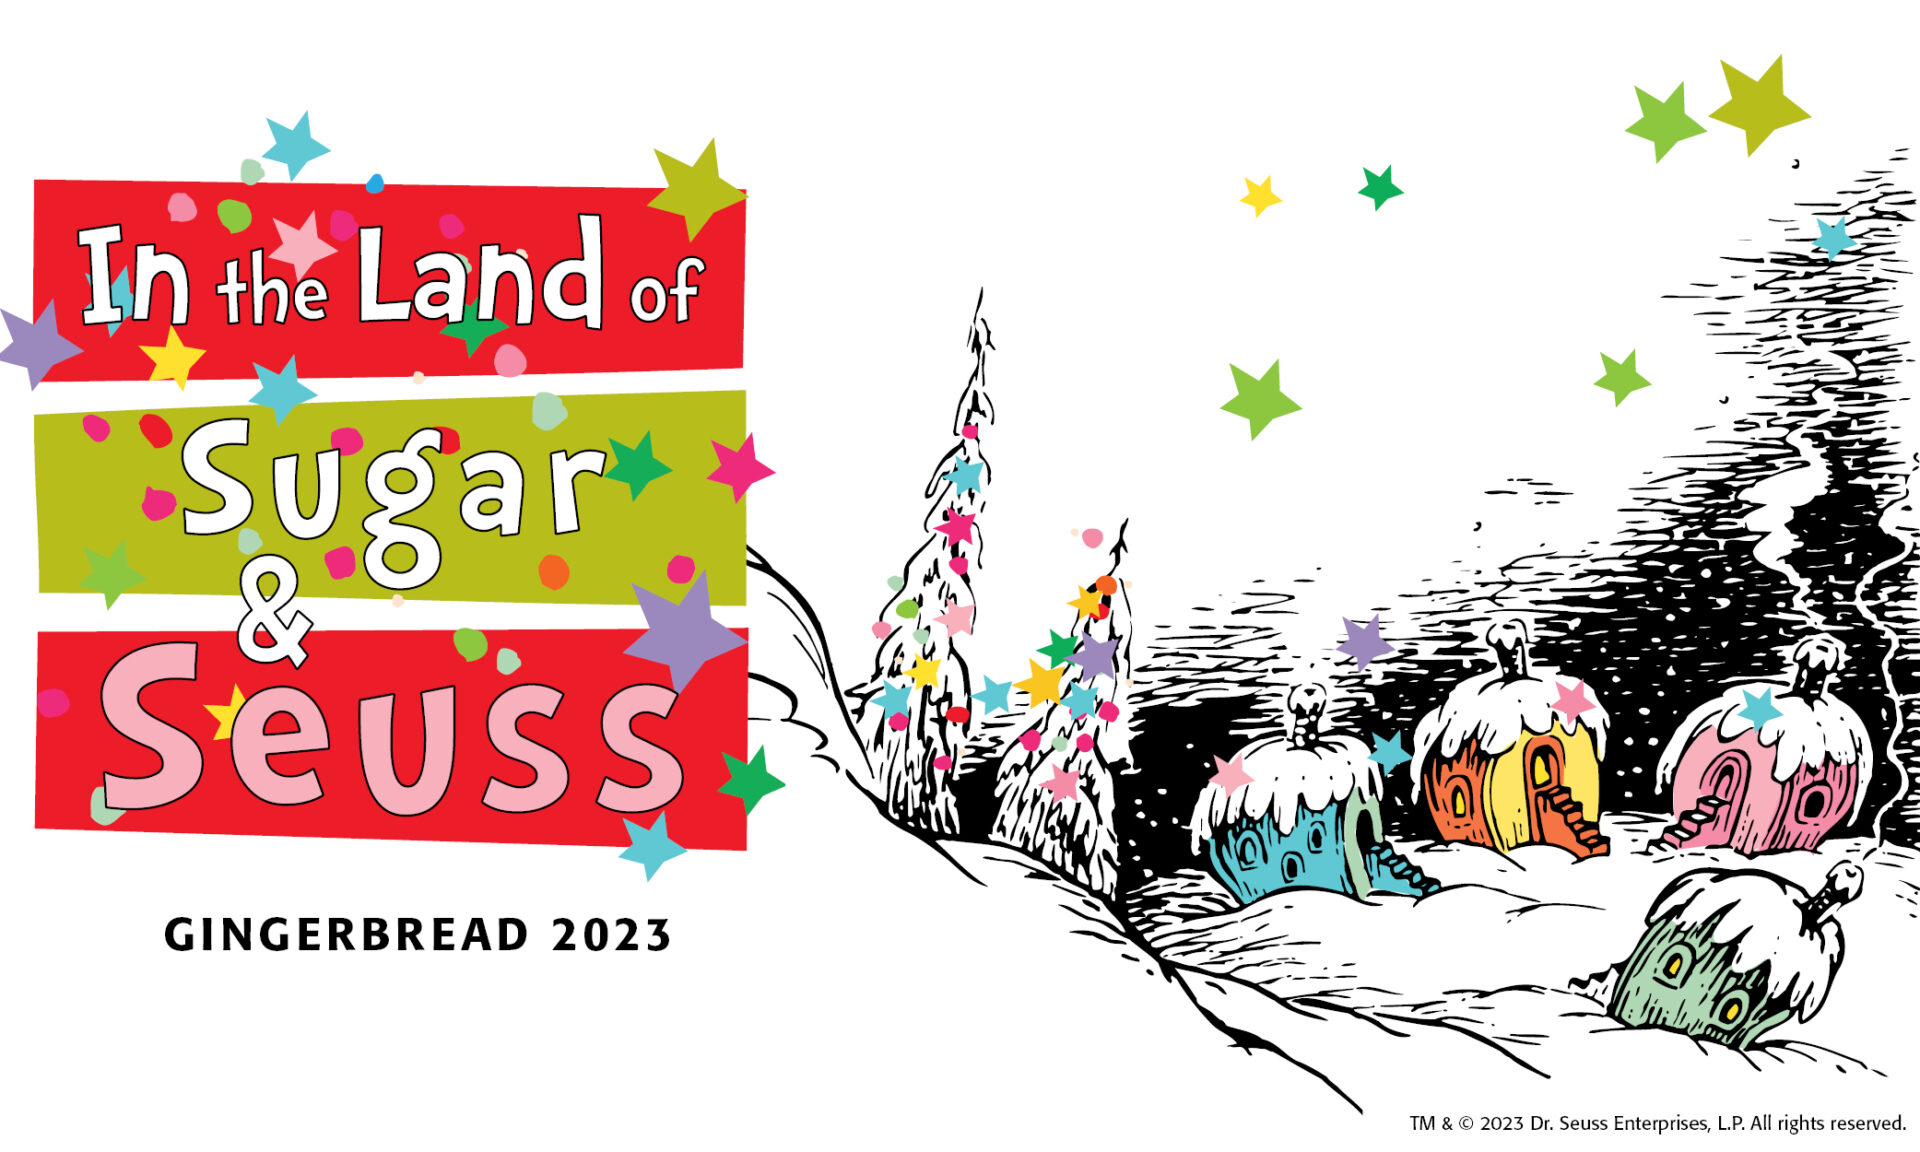 In the Land of Sugar and Seuss: Gingerbread 2023